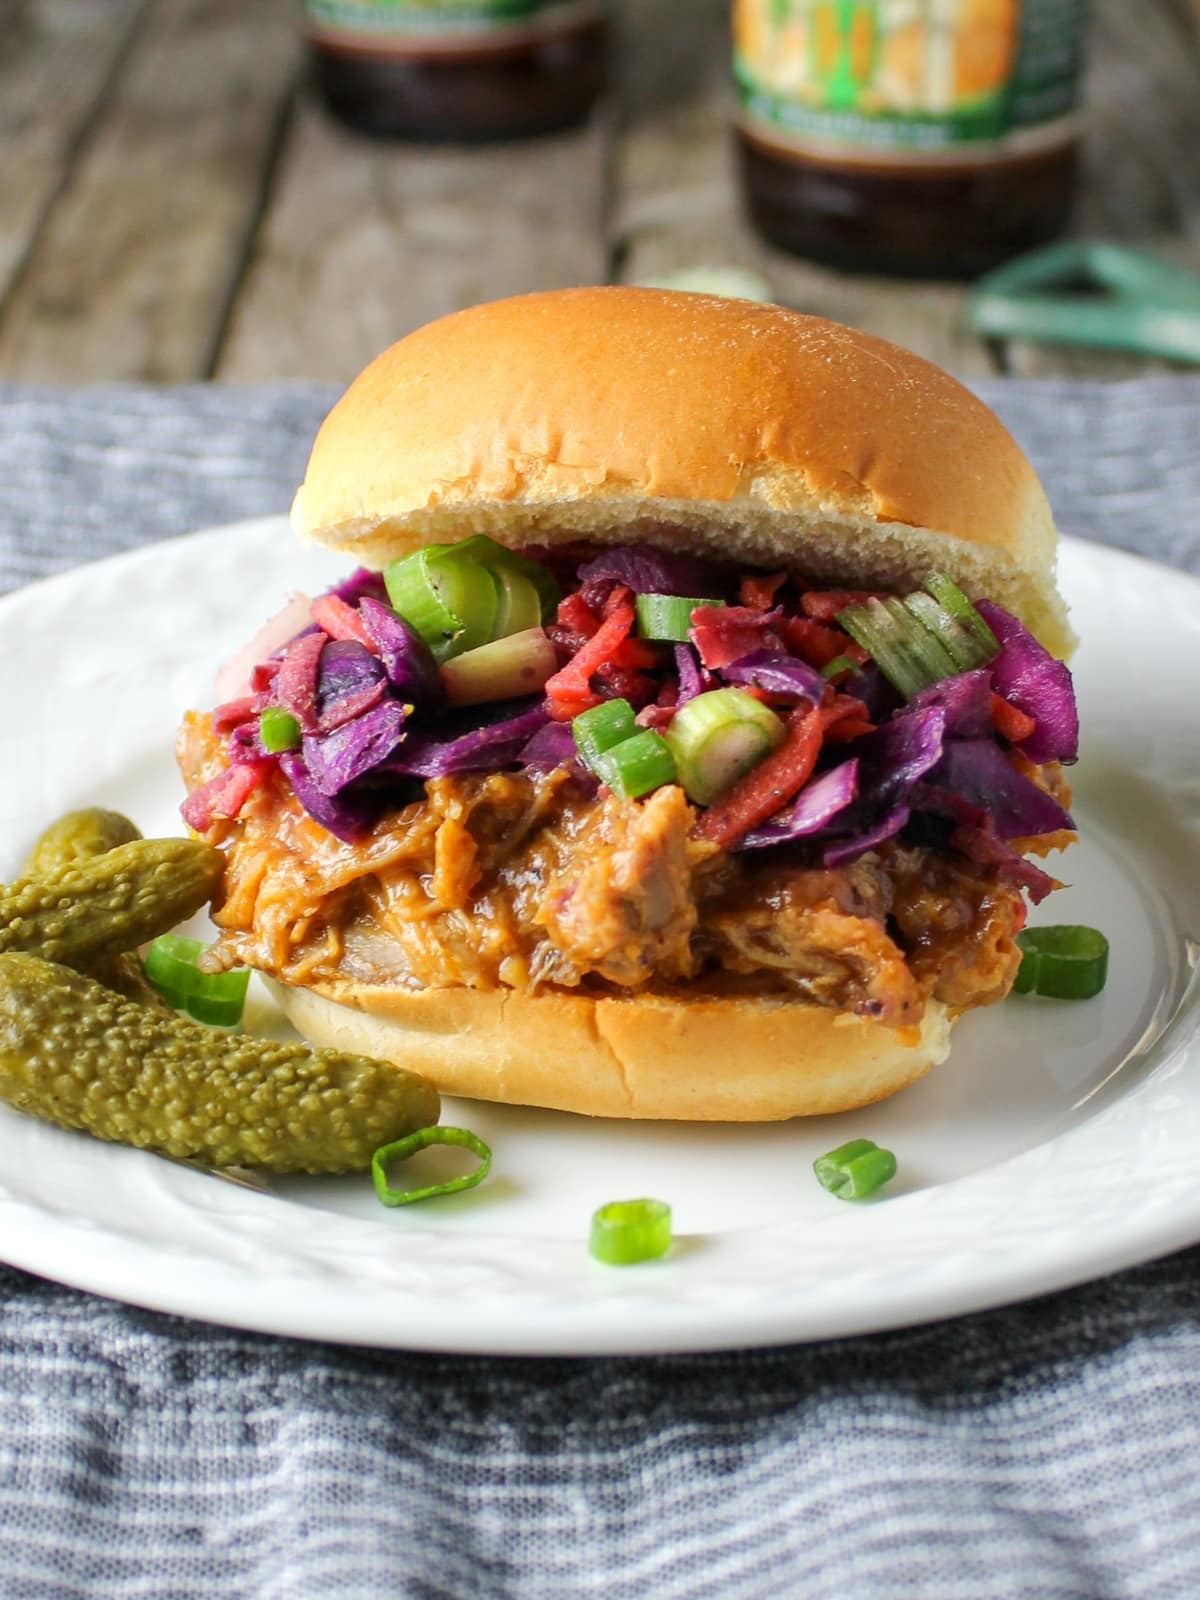 Appetizer recipes - BBQ Pulled Pork Sliders with Tangy Warm Cabbage Slaw on a plate with pickles.